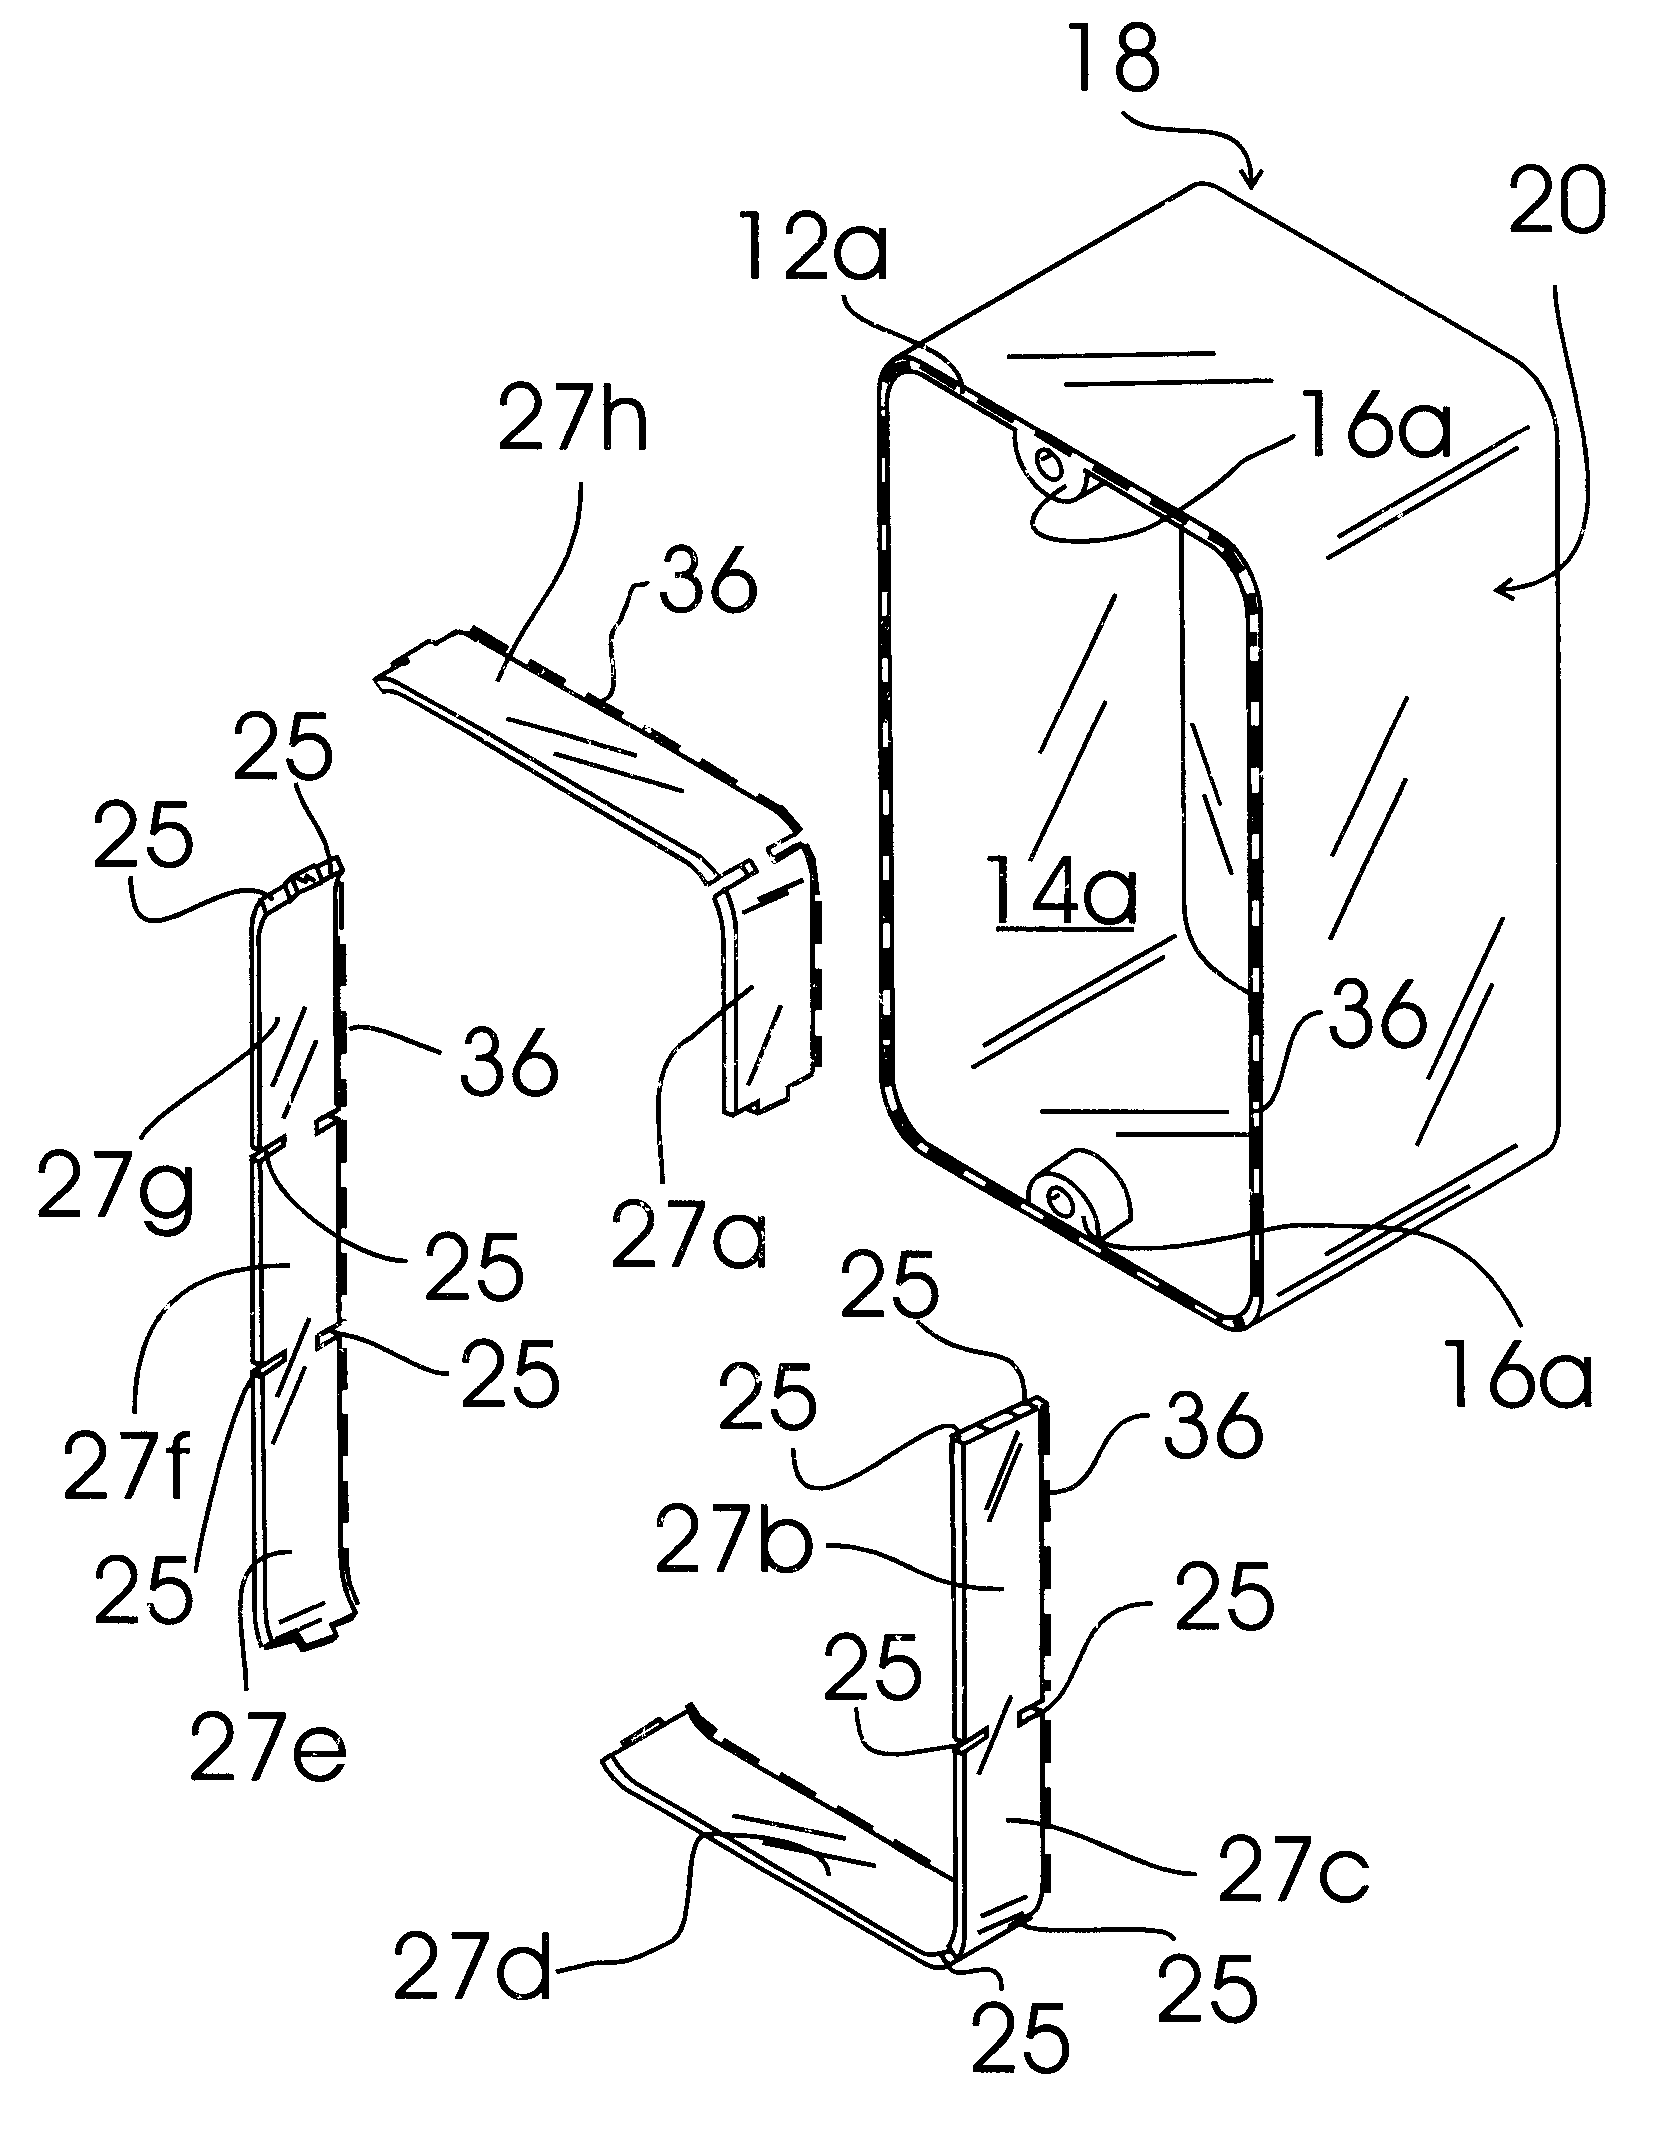 Electrical connection box having a break away shielding structure